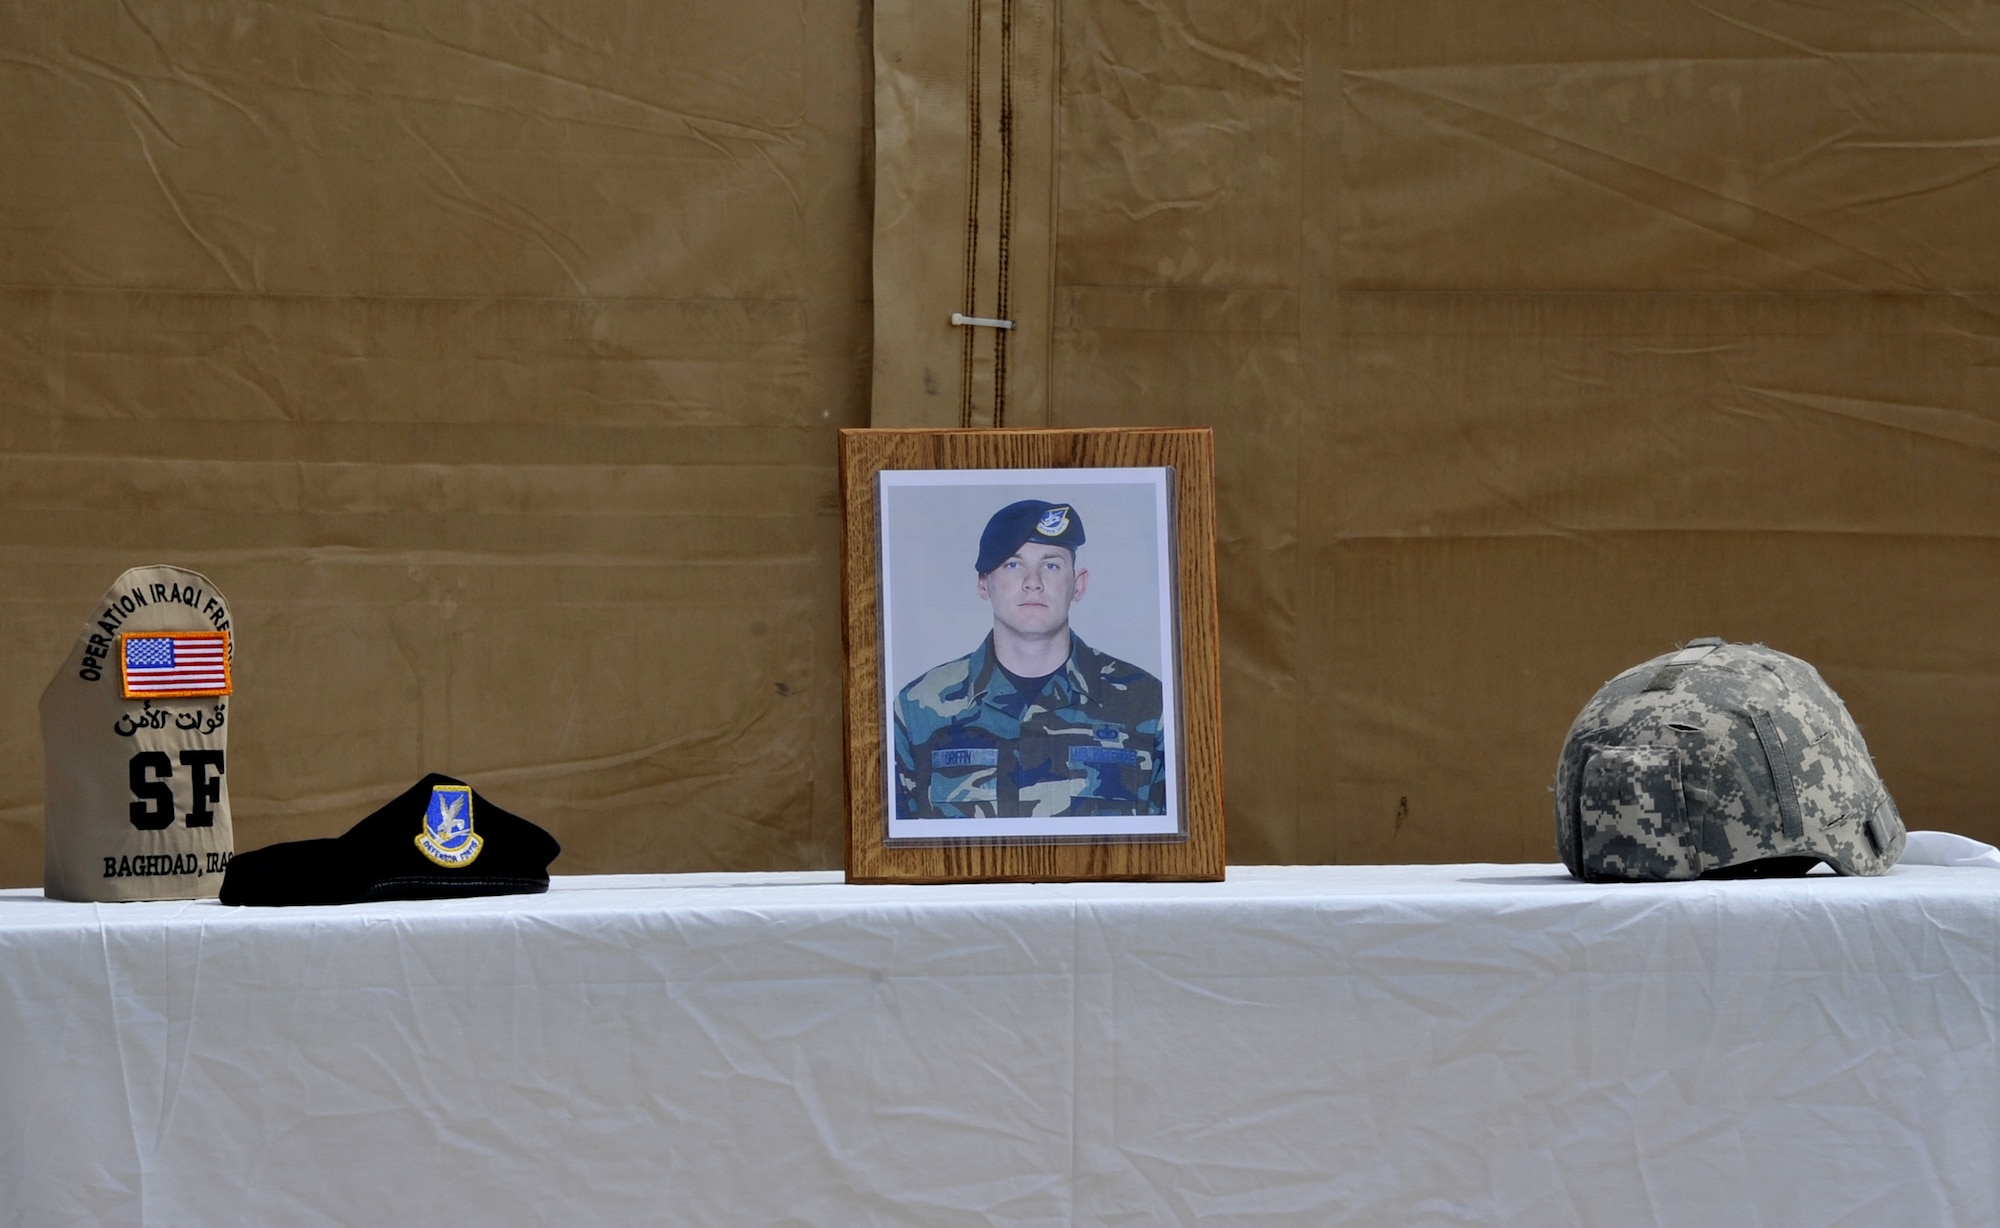 SATHER AIR BASE, Iraq – A table displays a photo of fallen security forces member Staff Sgt. Travis Griffin and items that pertained to his profession during a ceremony here April 3 honoring the lost Airman. During the ceremony Sather Airmen renamed the base fitness center after Sergeant Griffin, who gave his life April 3, 2008, while on patrol in Baghdad, Iraq, when an improvised explosive device impacted his vehicle.  (U.S. Air Force photo by Staff Sgt. Amanda Currier)